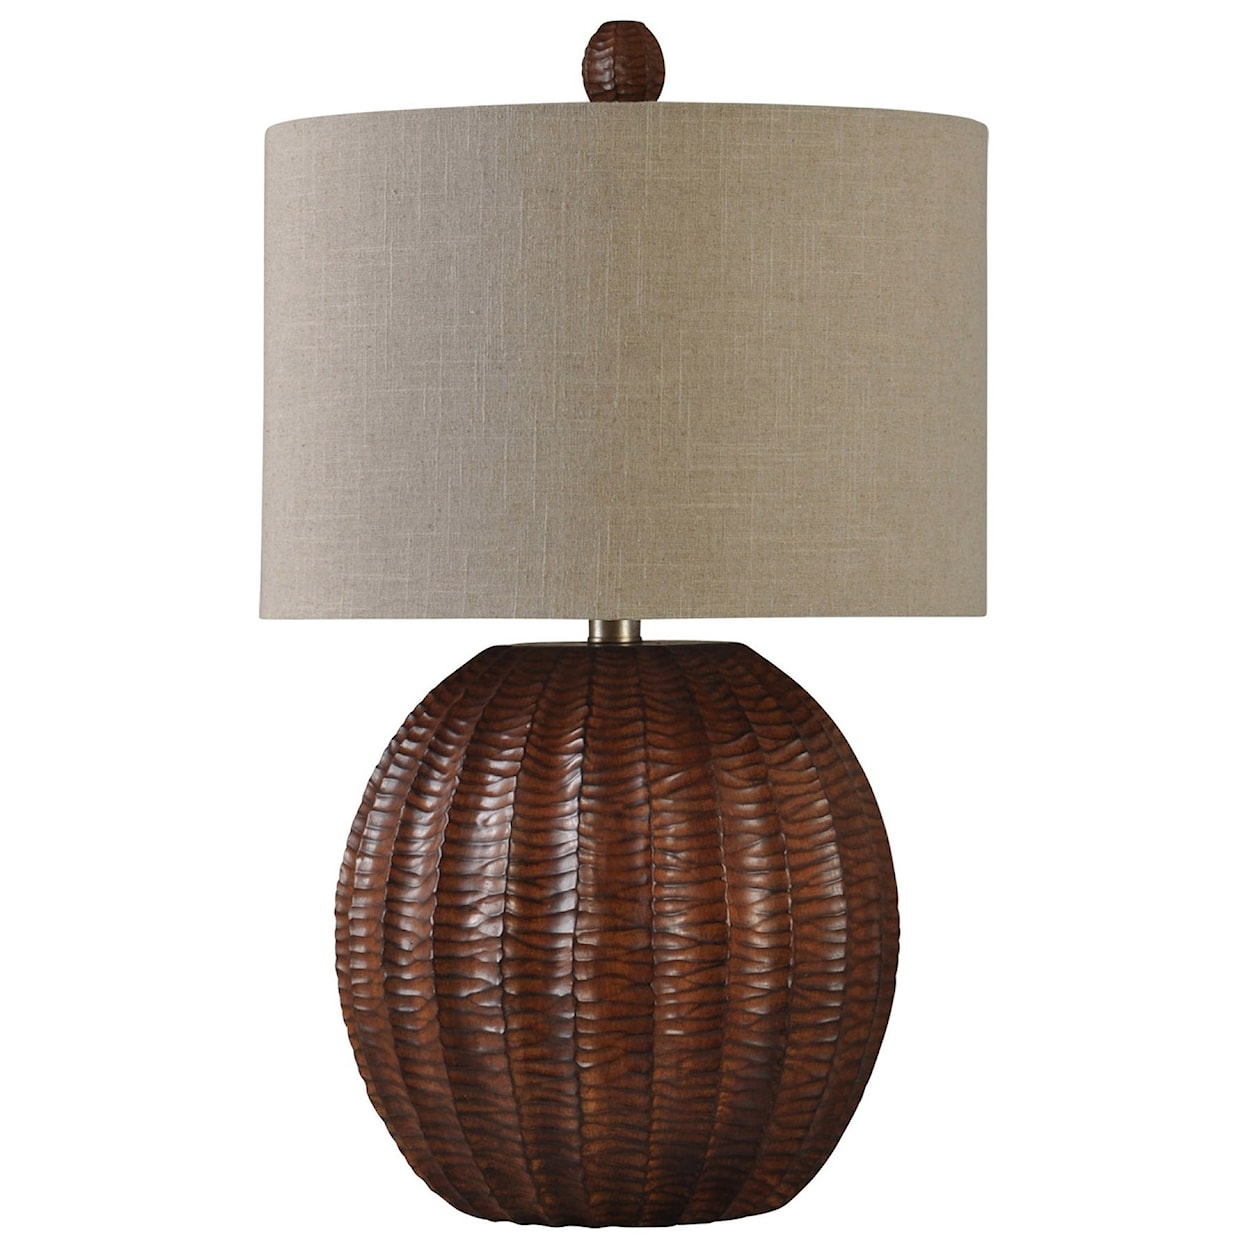 StyleCraft Lamps Wood Brown Finish Table Lamp